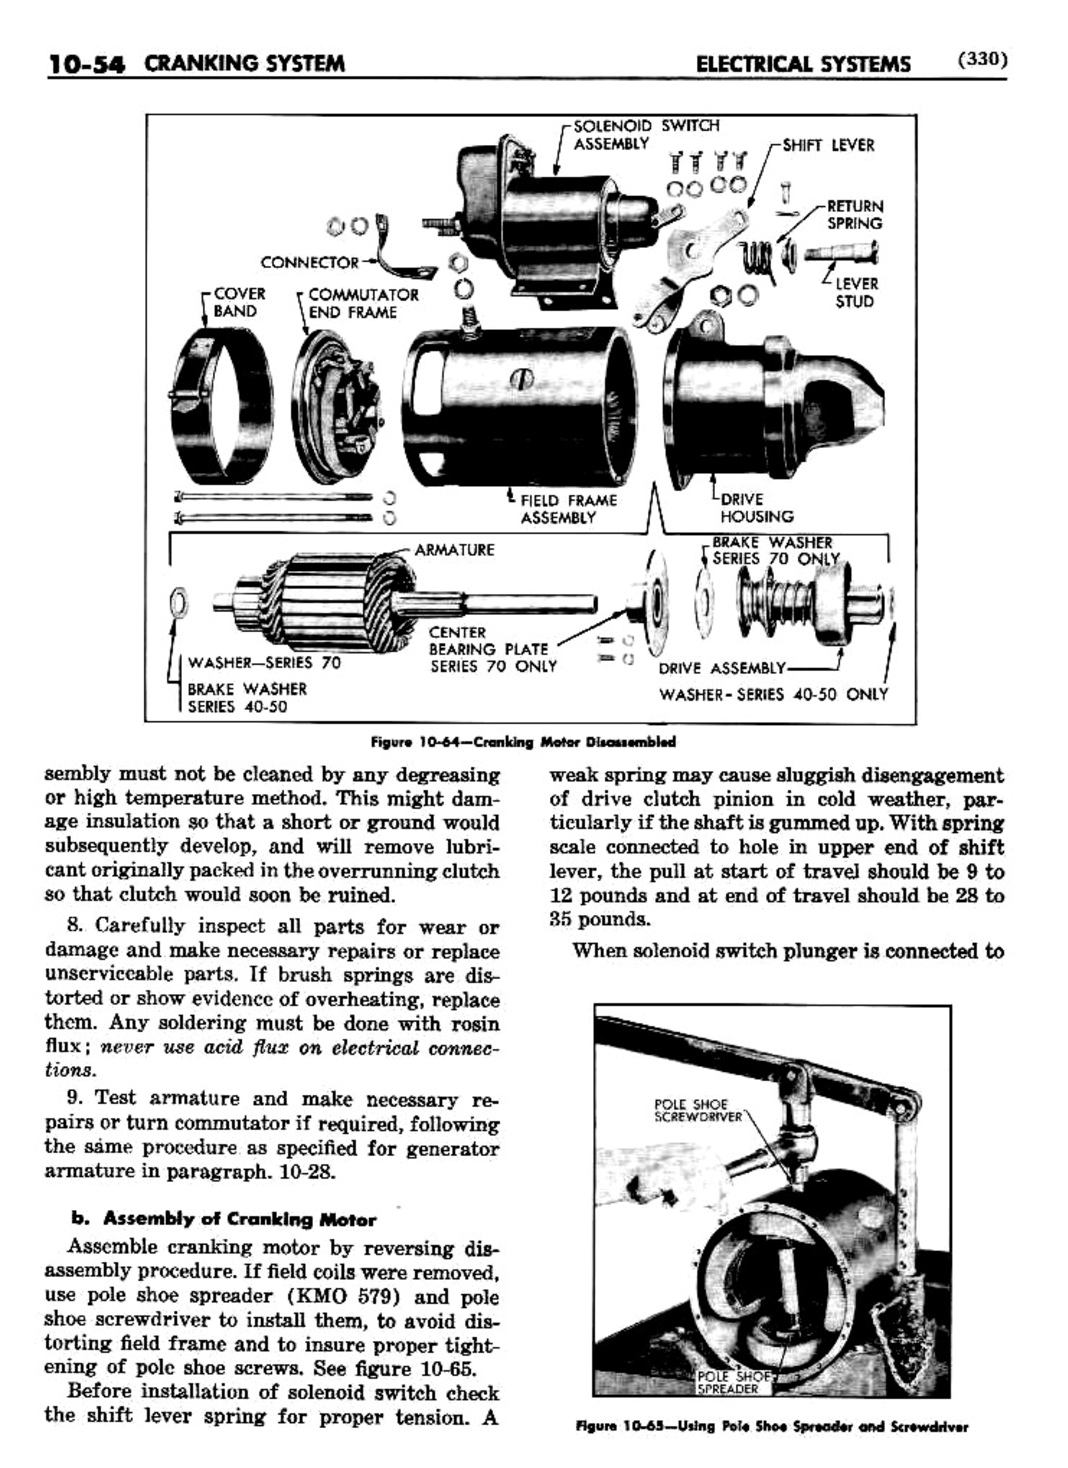 n_11 1948 Buick Shop Manual - Electrical Systems-054-054.jpg